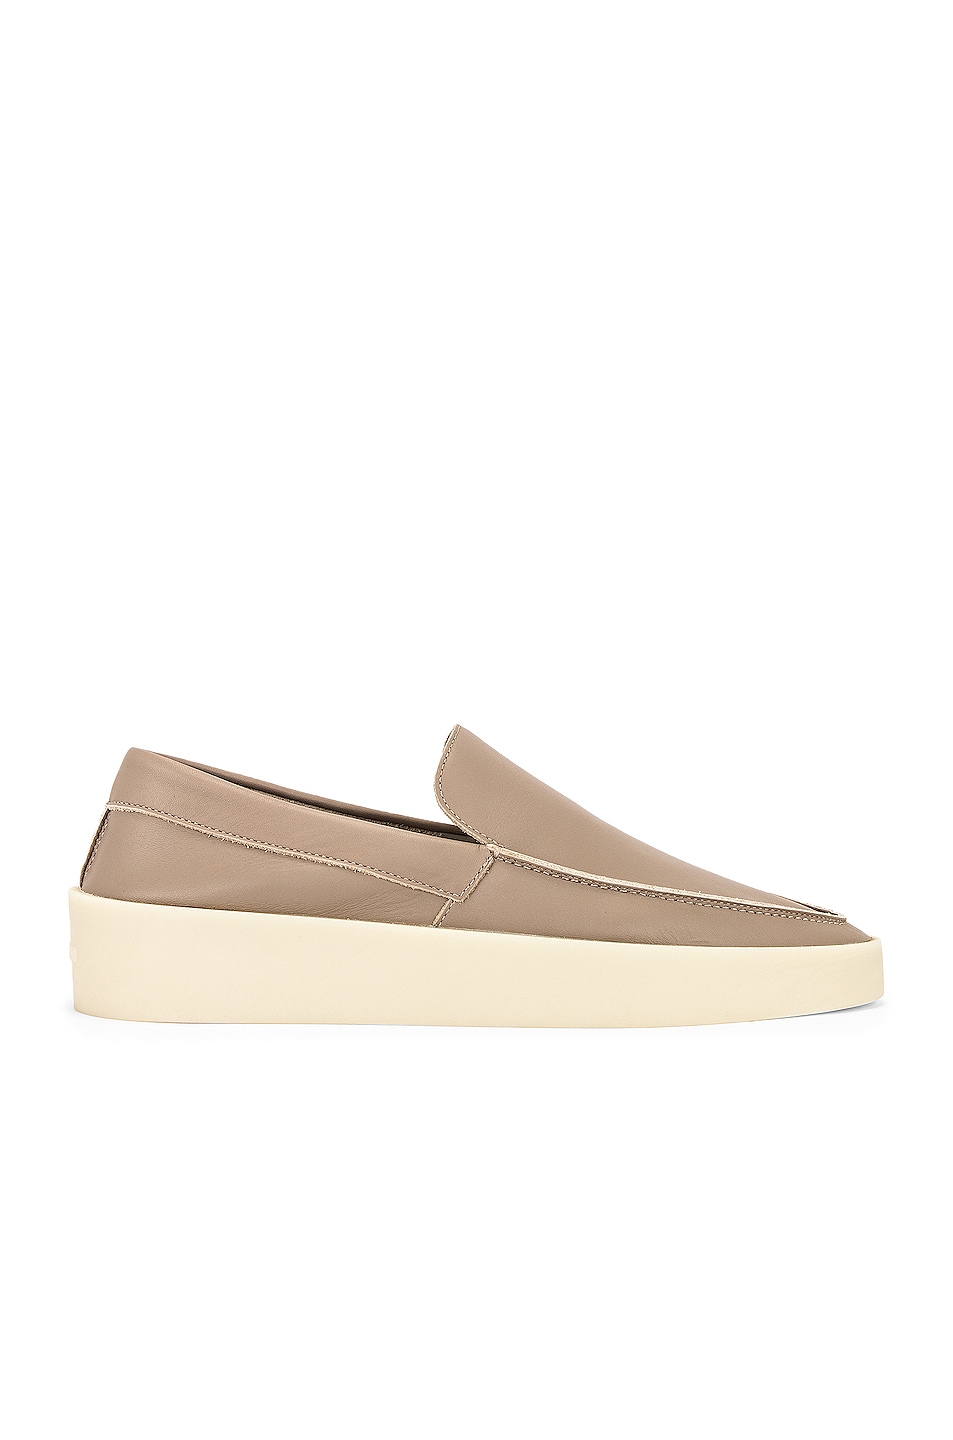 Image 1 of Fear of God The Loafer in Taupe